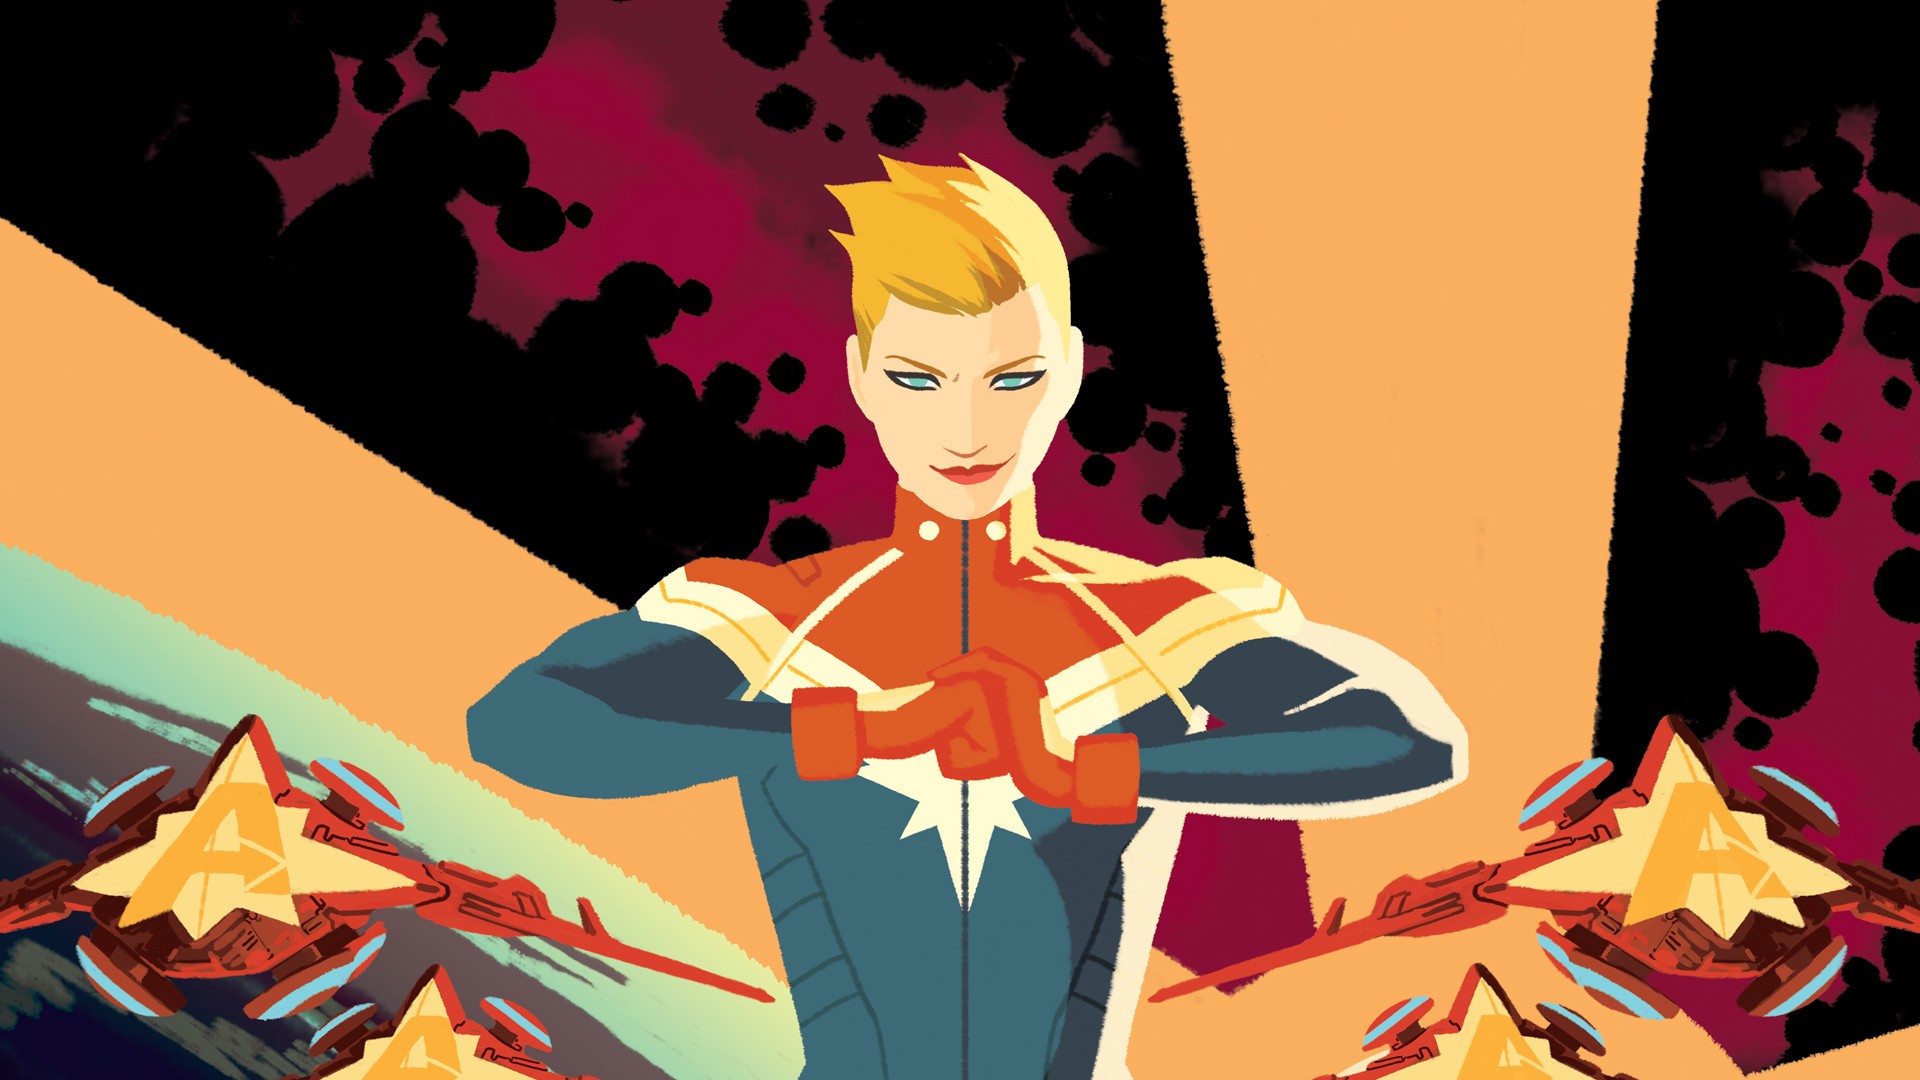 Captain Marvel Animated Poster Wallpaper with high-resolution 1920x1080 pixel. You can use this poster wallpaper for your Desktop Computers, Mac Screensavers, Windows Backgrounds, iPhone Wallpapers, Tablet or Android Lock screen and another Mobile device